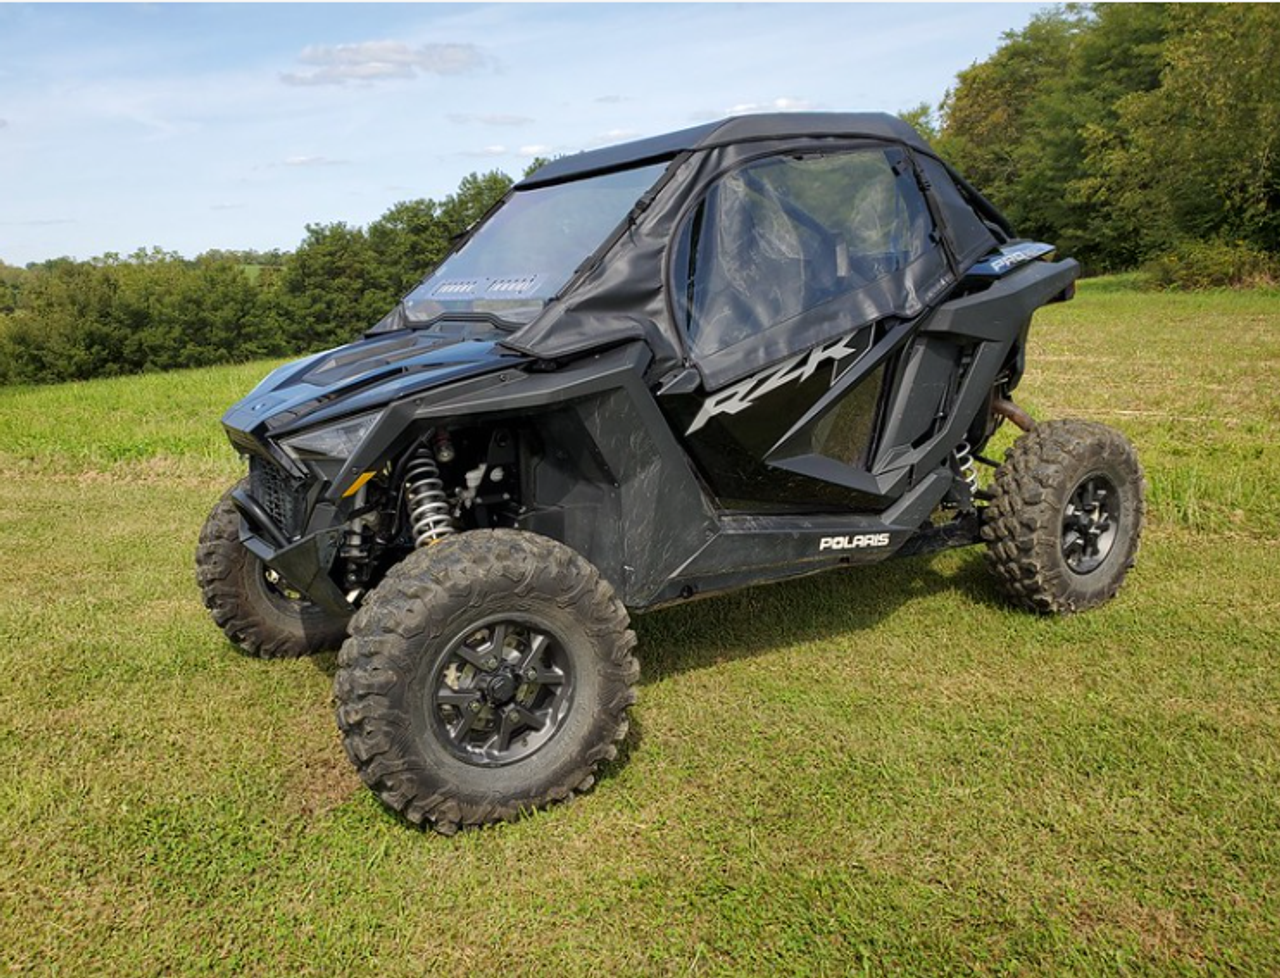 3 Star side x side accessories Polaris RZR Pro XP/Turbo R Full Cab Enclosure for Hard Windshield side angle view